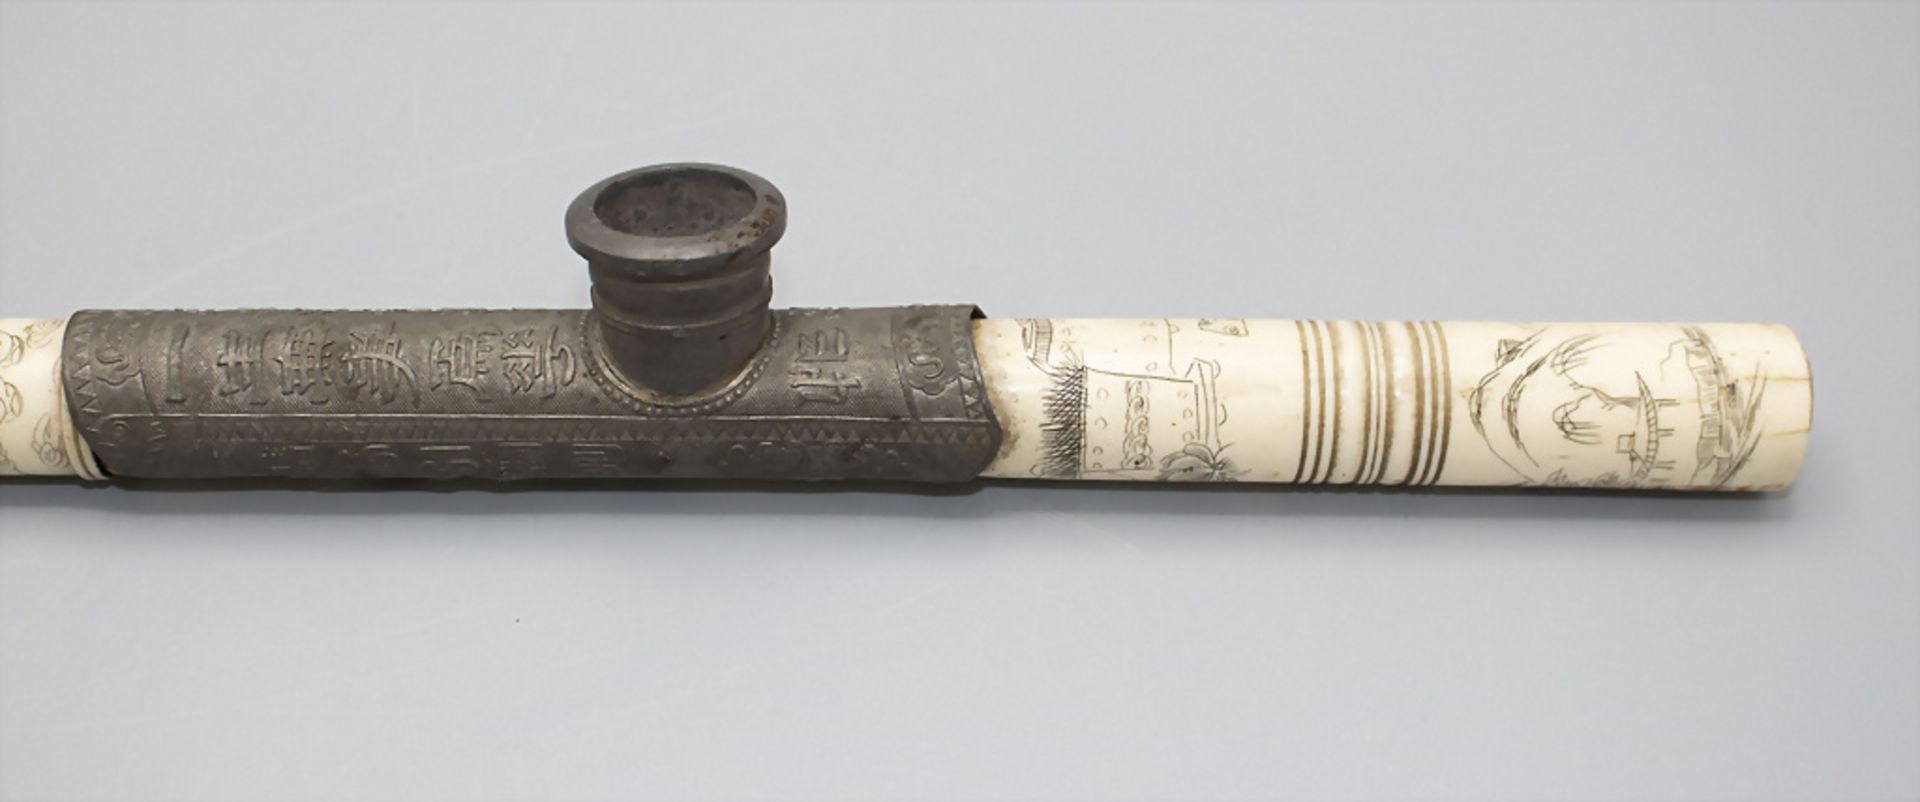 Opiumpfeife / An opium pipe, China, wohl 19. Jh. - Image 3 of 5